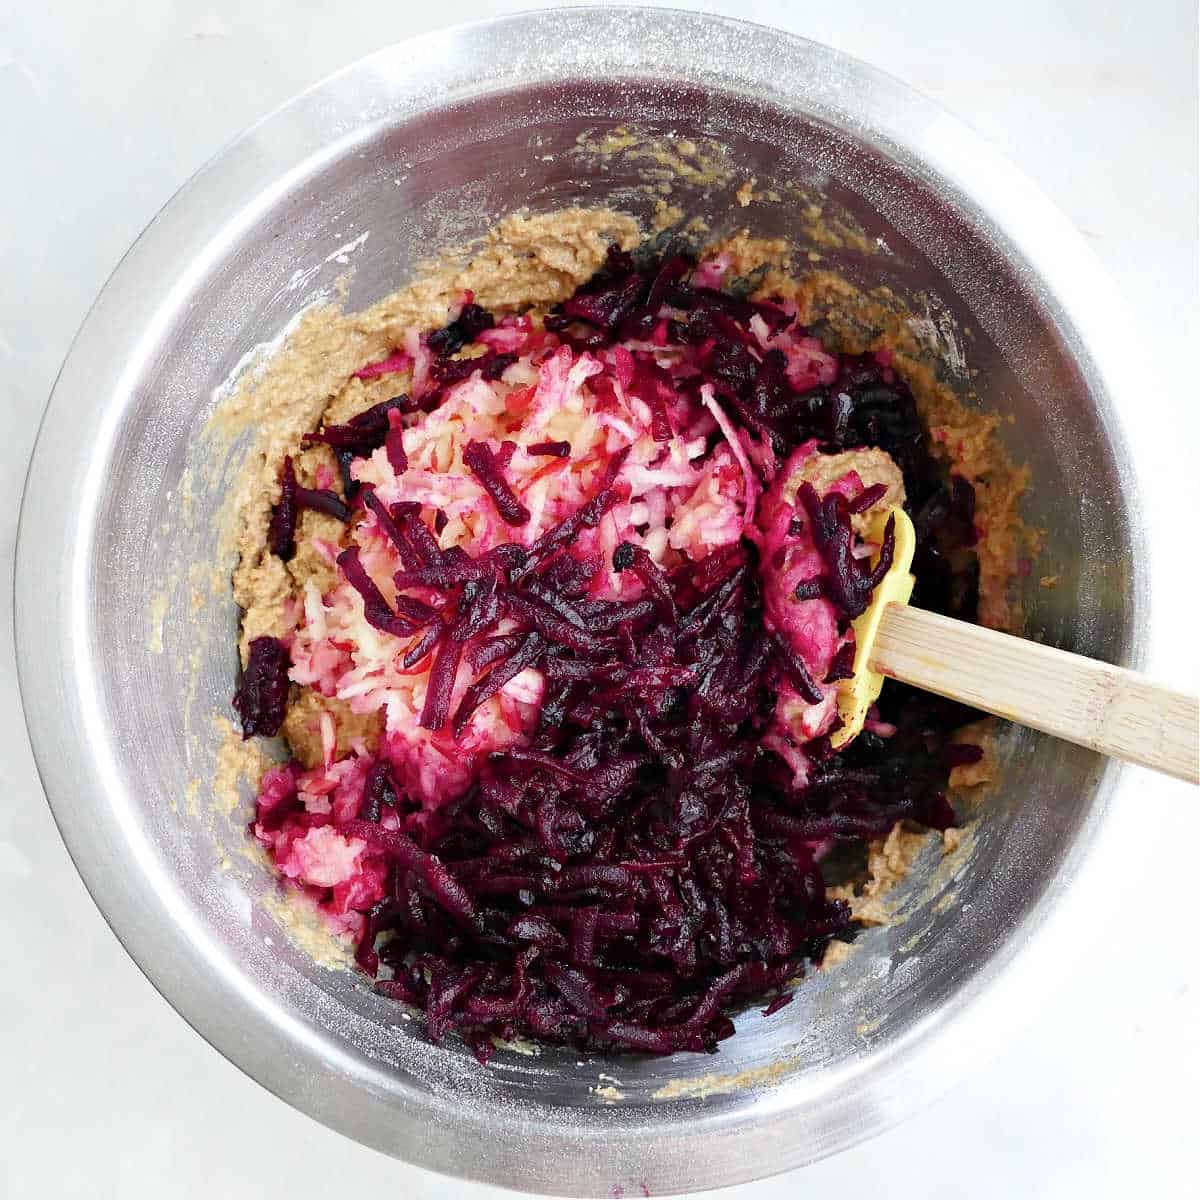 shredded beets and apples being stirred into muffin batter with a rubber spatula